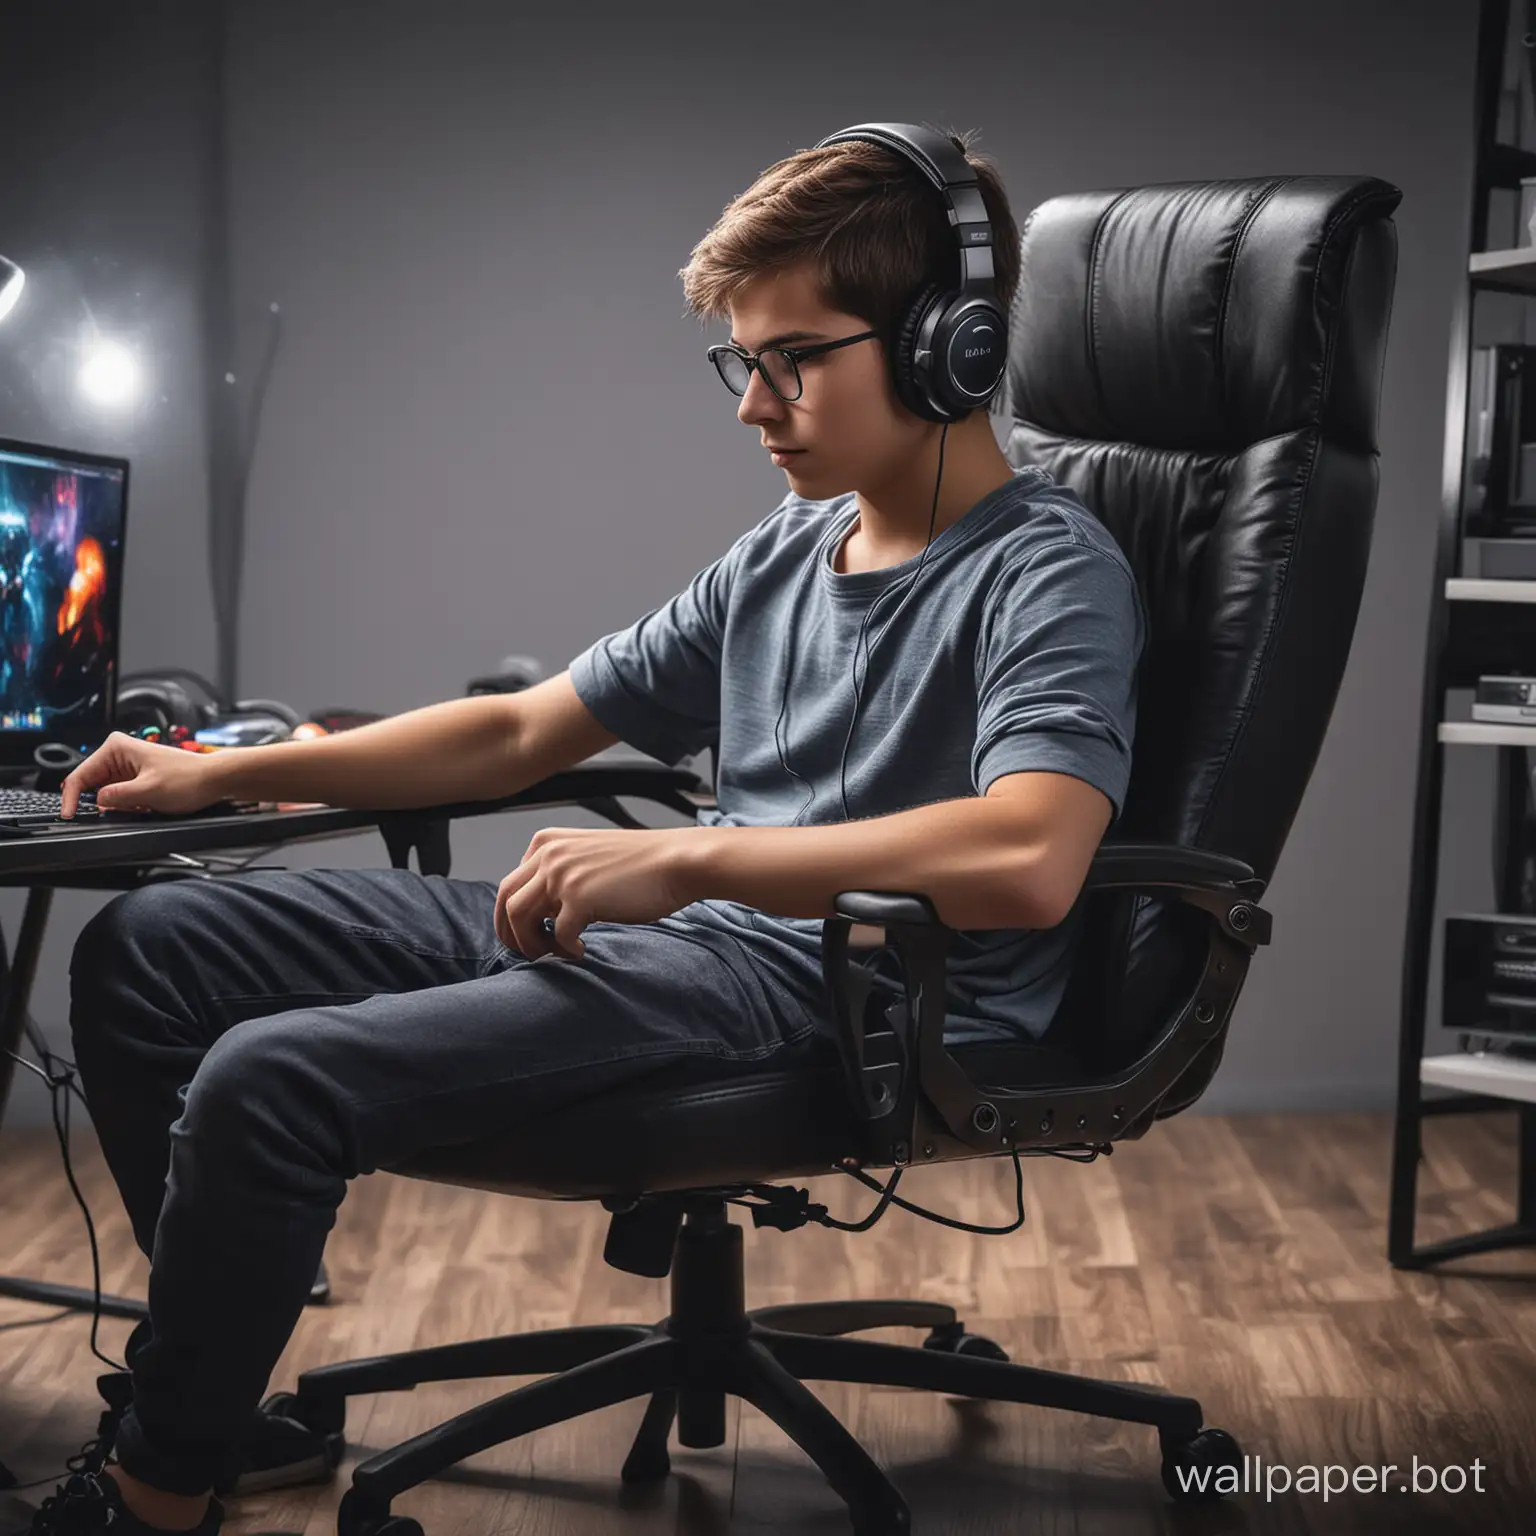 create a 4k hd  wallpaper for laptop where a boy is playing games on pc wearing a headphone sit on the gaming chair